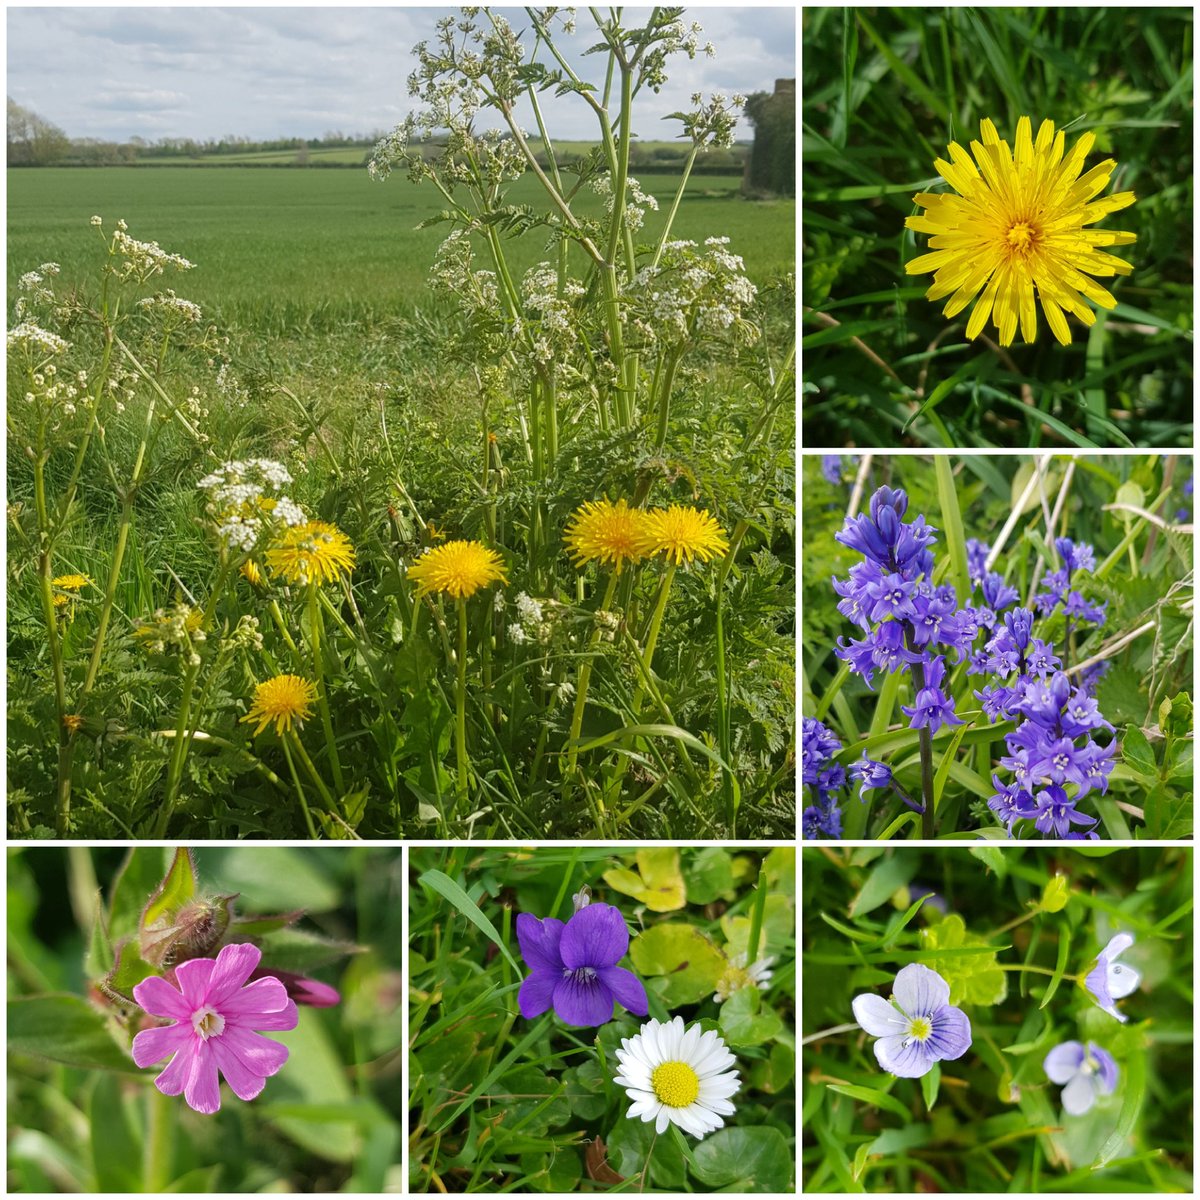 #Wildflowerhour The Chilterns are looking good with dandelions, bluebells, red campion, violets, daisies and speedwell #Wildflowers #InternationalDayoftheDandelion